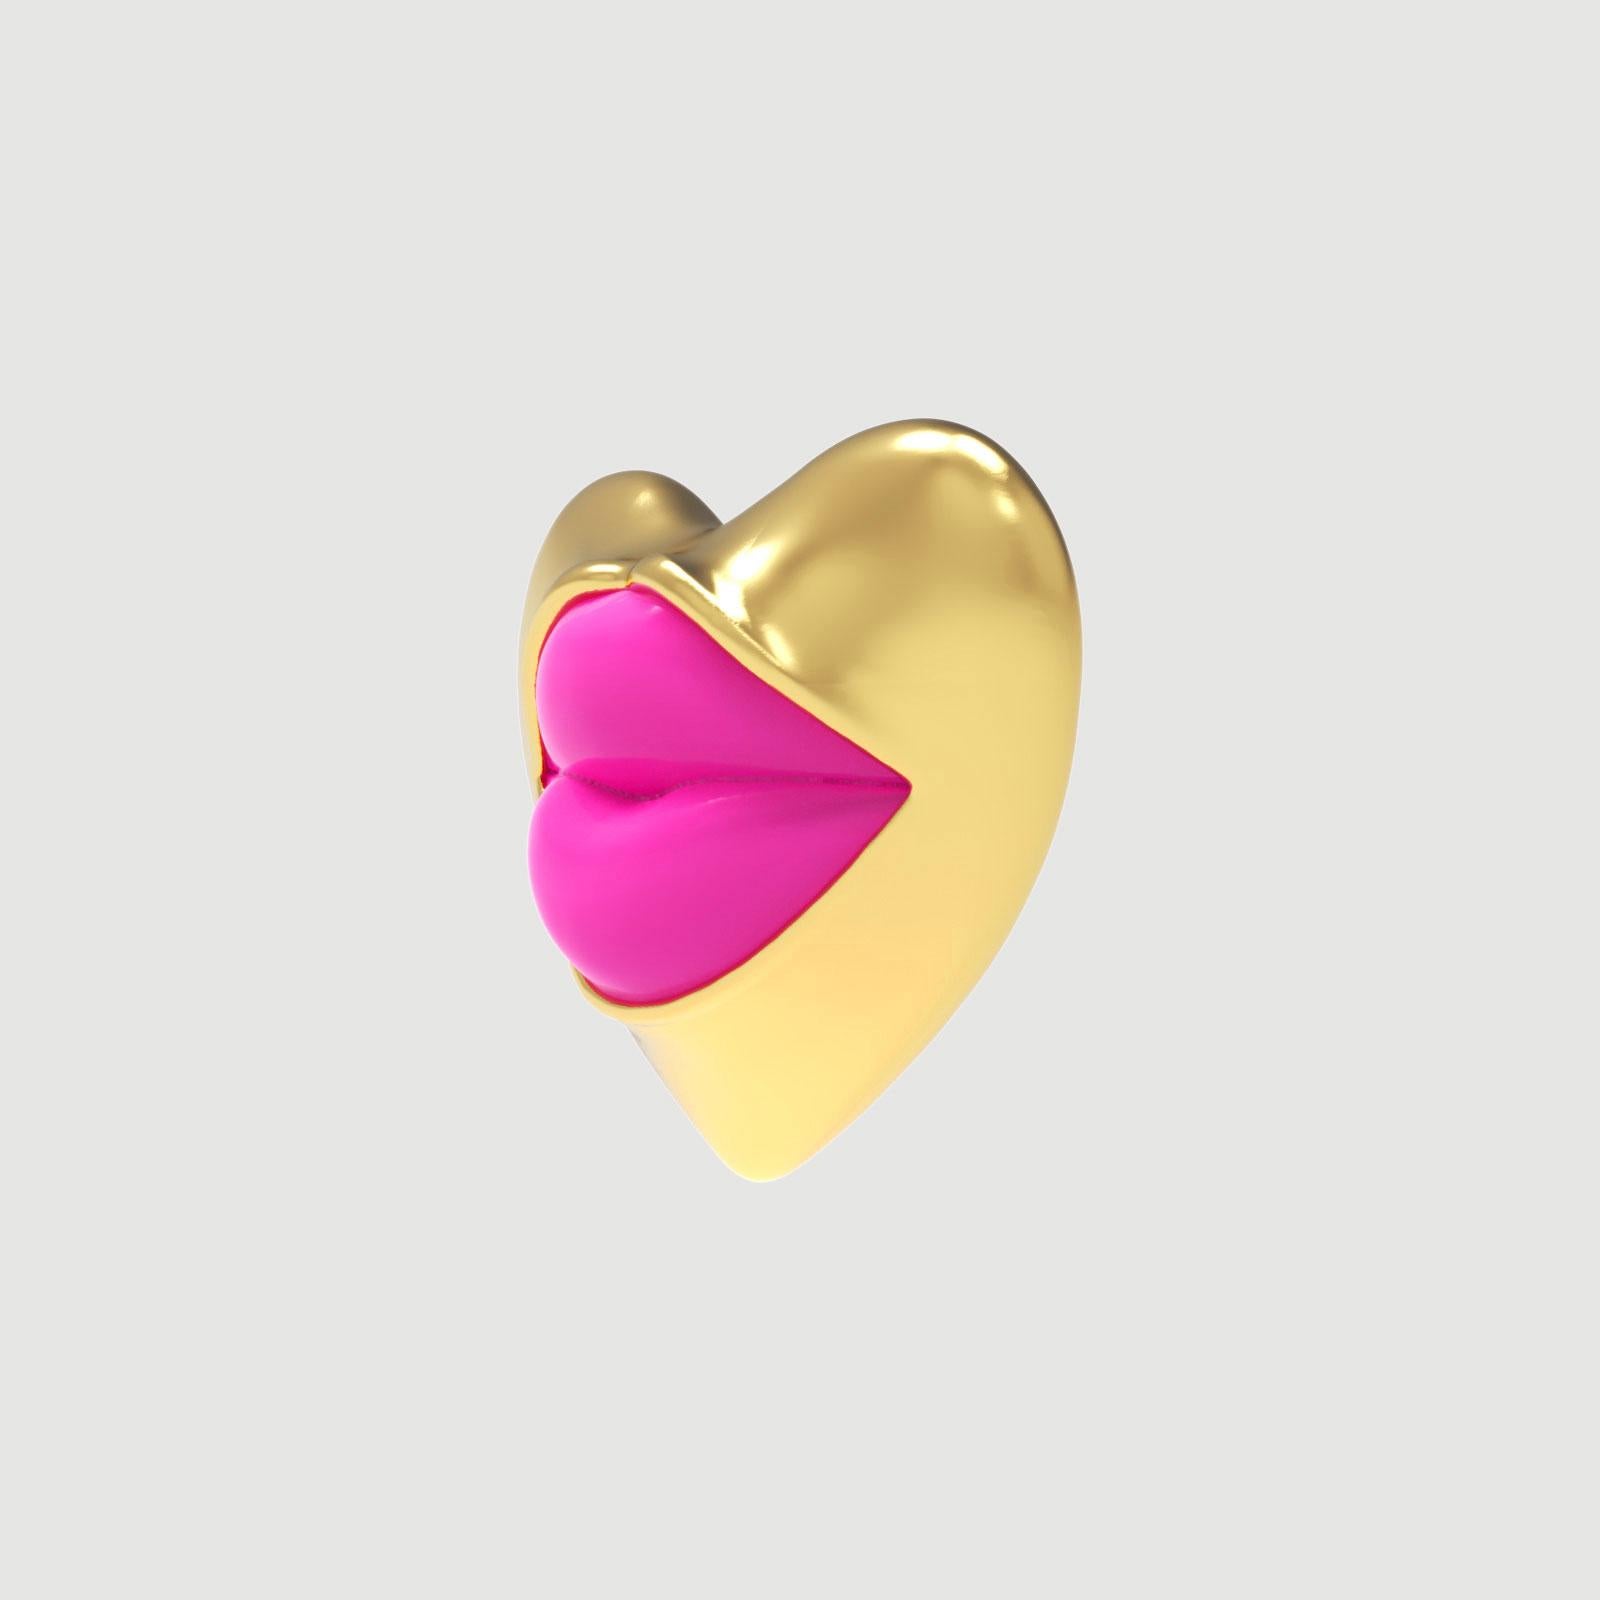 Sold as single. Pair and stack them.

Introducing our exquisite ❤️ Heart-Shaped Gold Vermeil Clip-On Earring, a stunning fusion of elegance and artistry. This extraordinary jewelry design is a must-have accessory for fashion-forward individuals